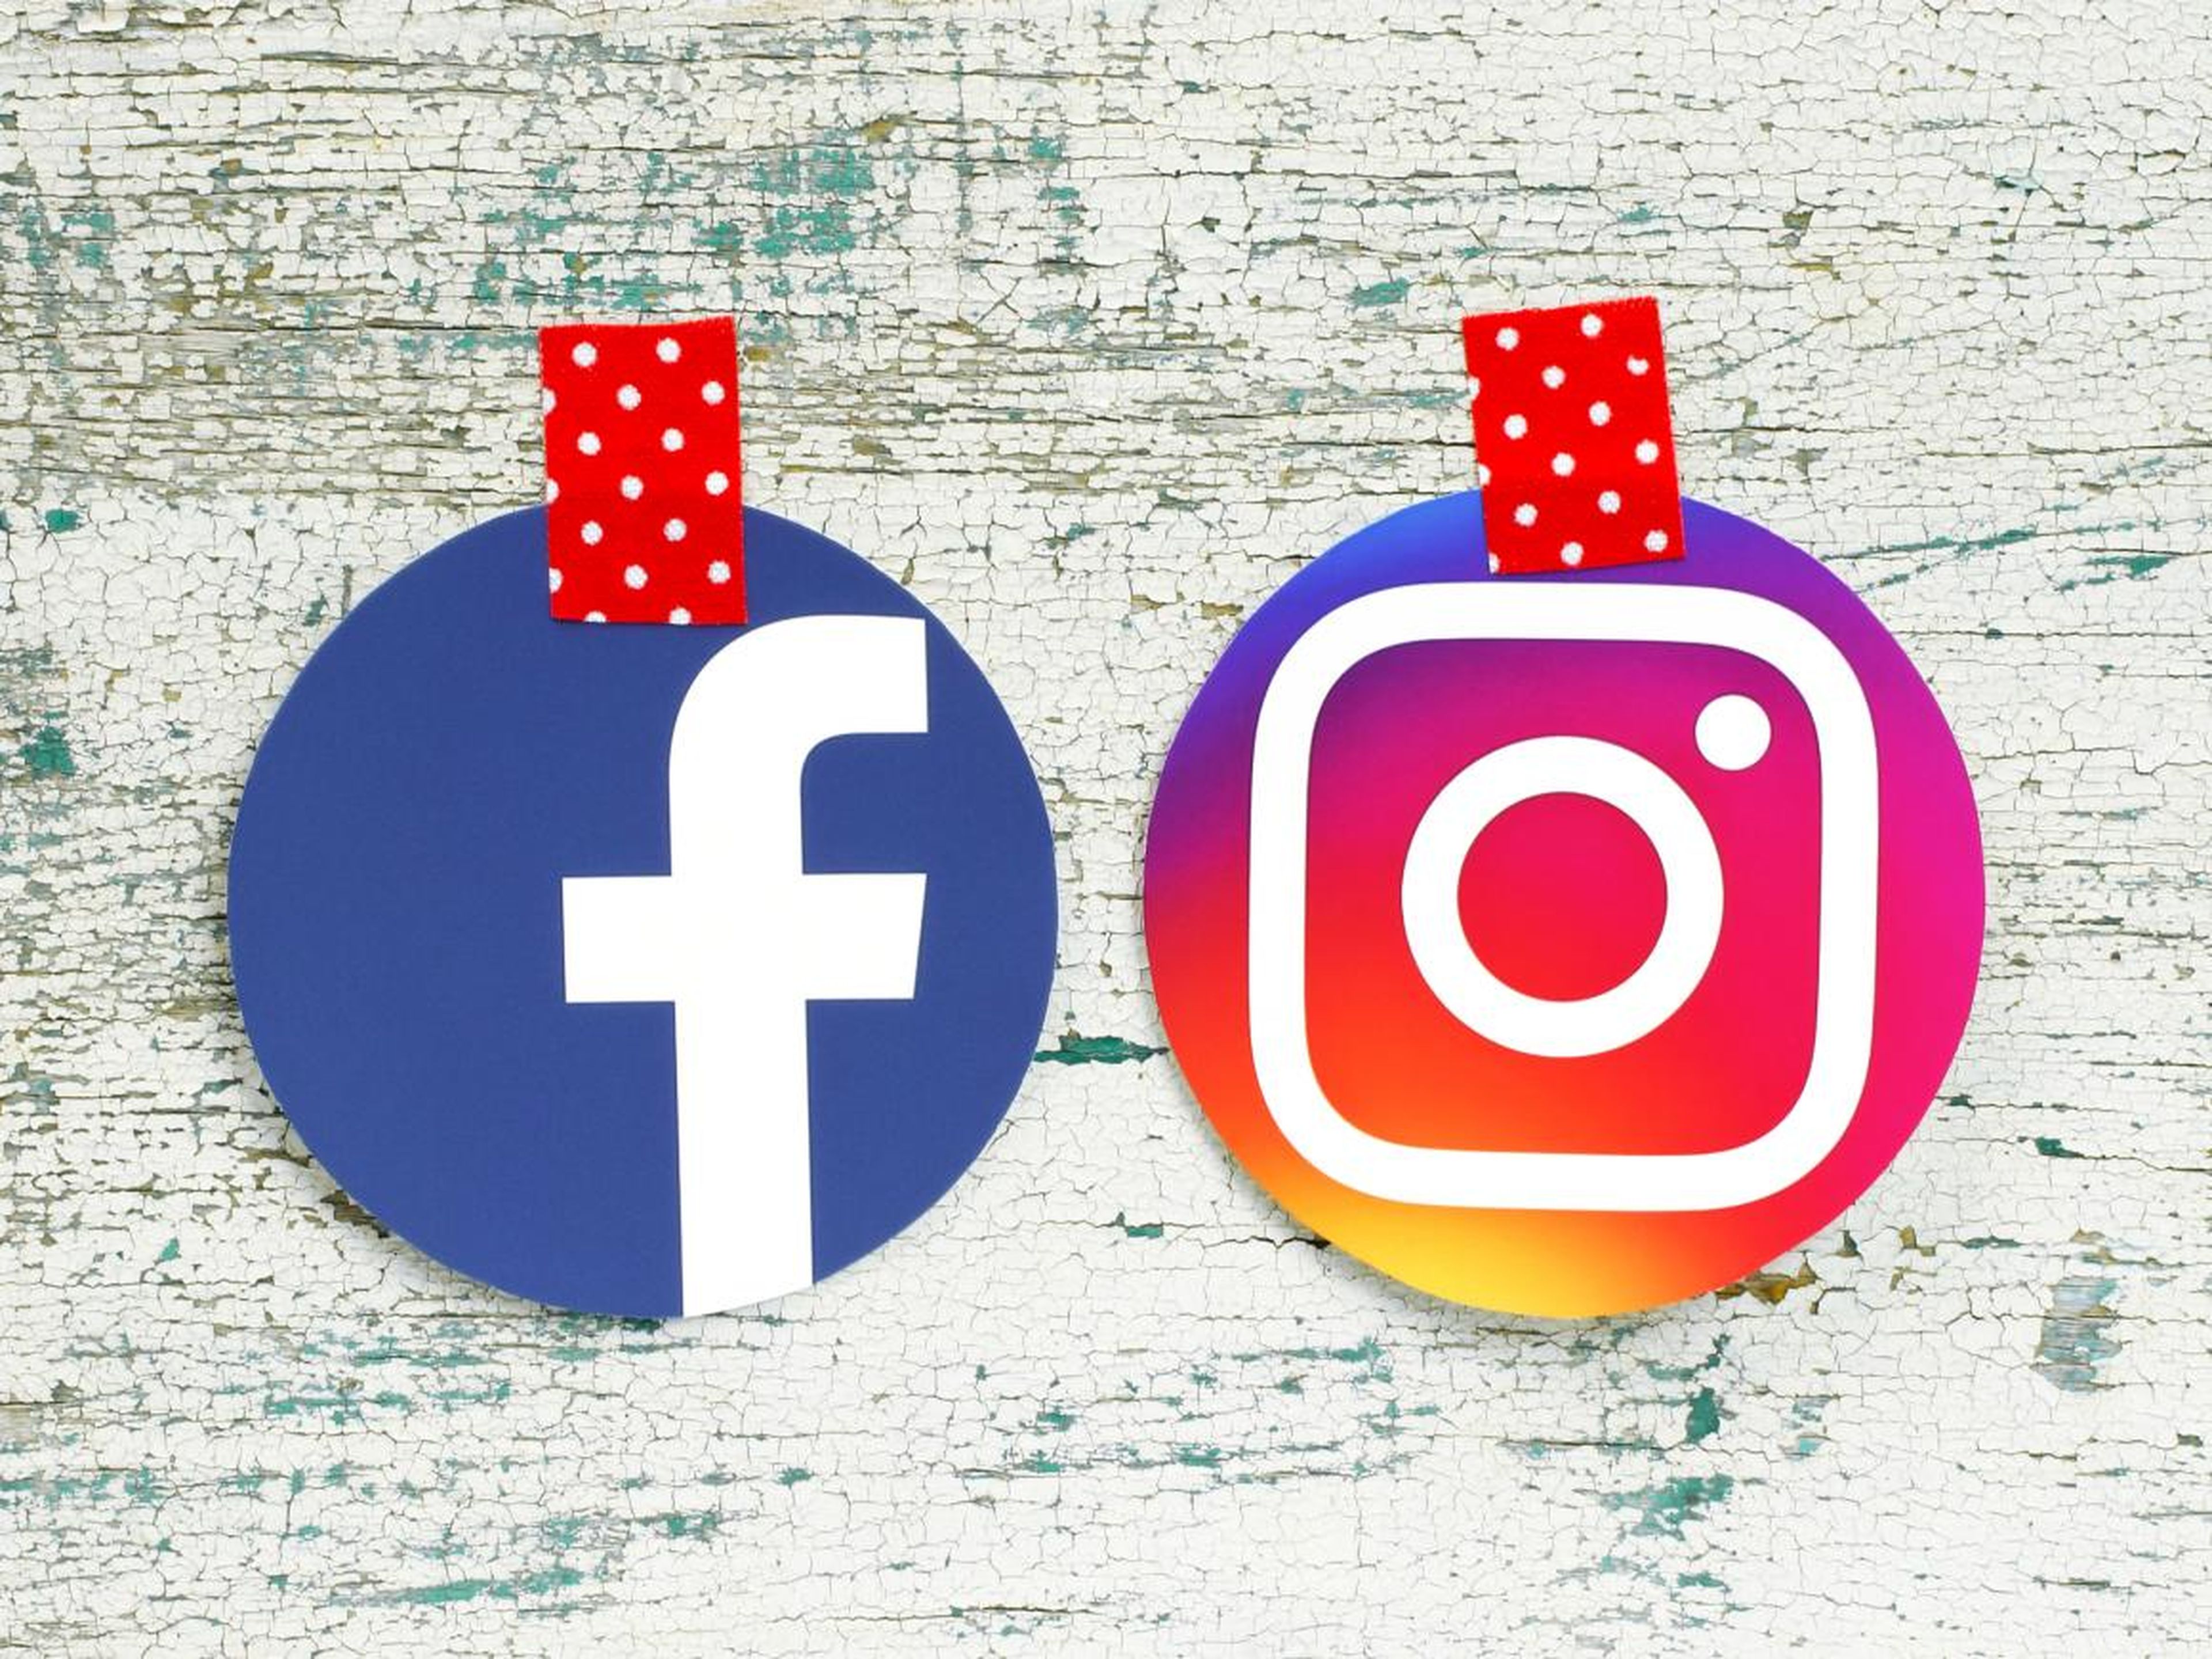 This particular integration could help Facebook harness the power of Instagram — an app loved by millennials — to lure a younger audience back to the core Facebook app. After all, it's the only way to use Facebook Dating.